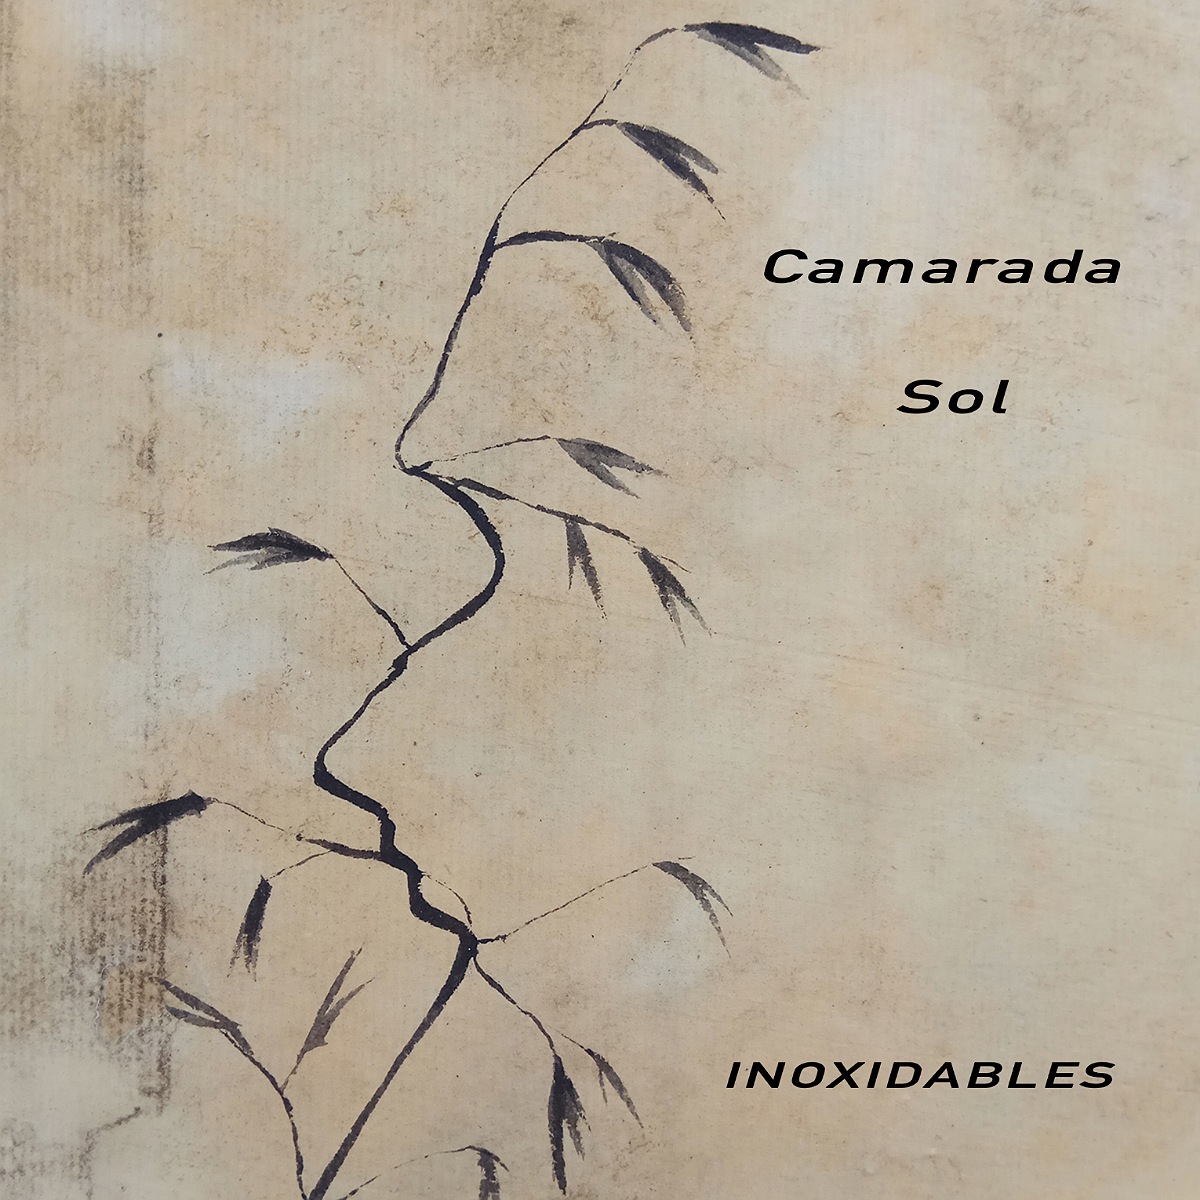 Want to be heard on Eardrum Buzz Radio? - Camarada Sol by @Inoxidables @Inoxidables13 - Send requests and submissions to Bret@eardrumbuzz.net